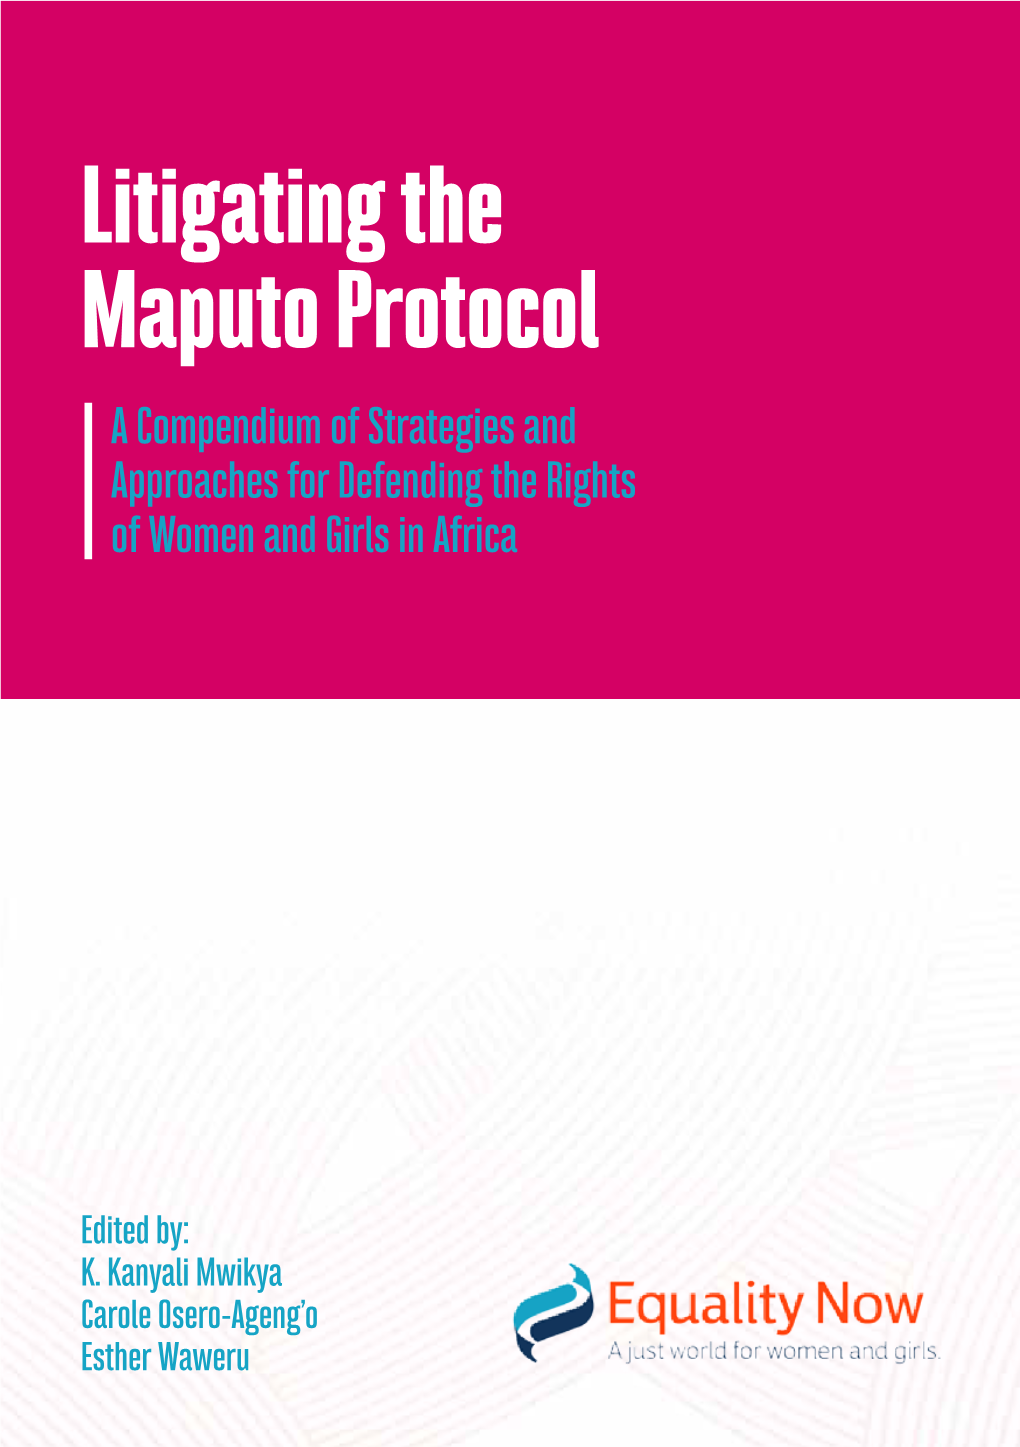 Litigating the Maputo Protocol a Compendium of Strategies and Approaches for Defending the Rights of Women and Girls in Africa